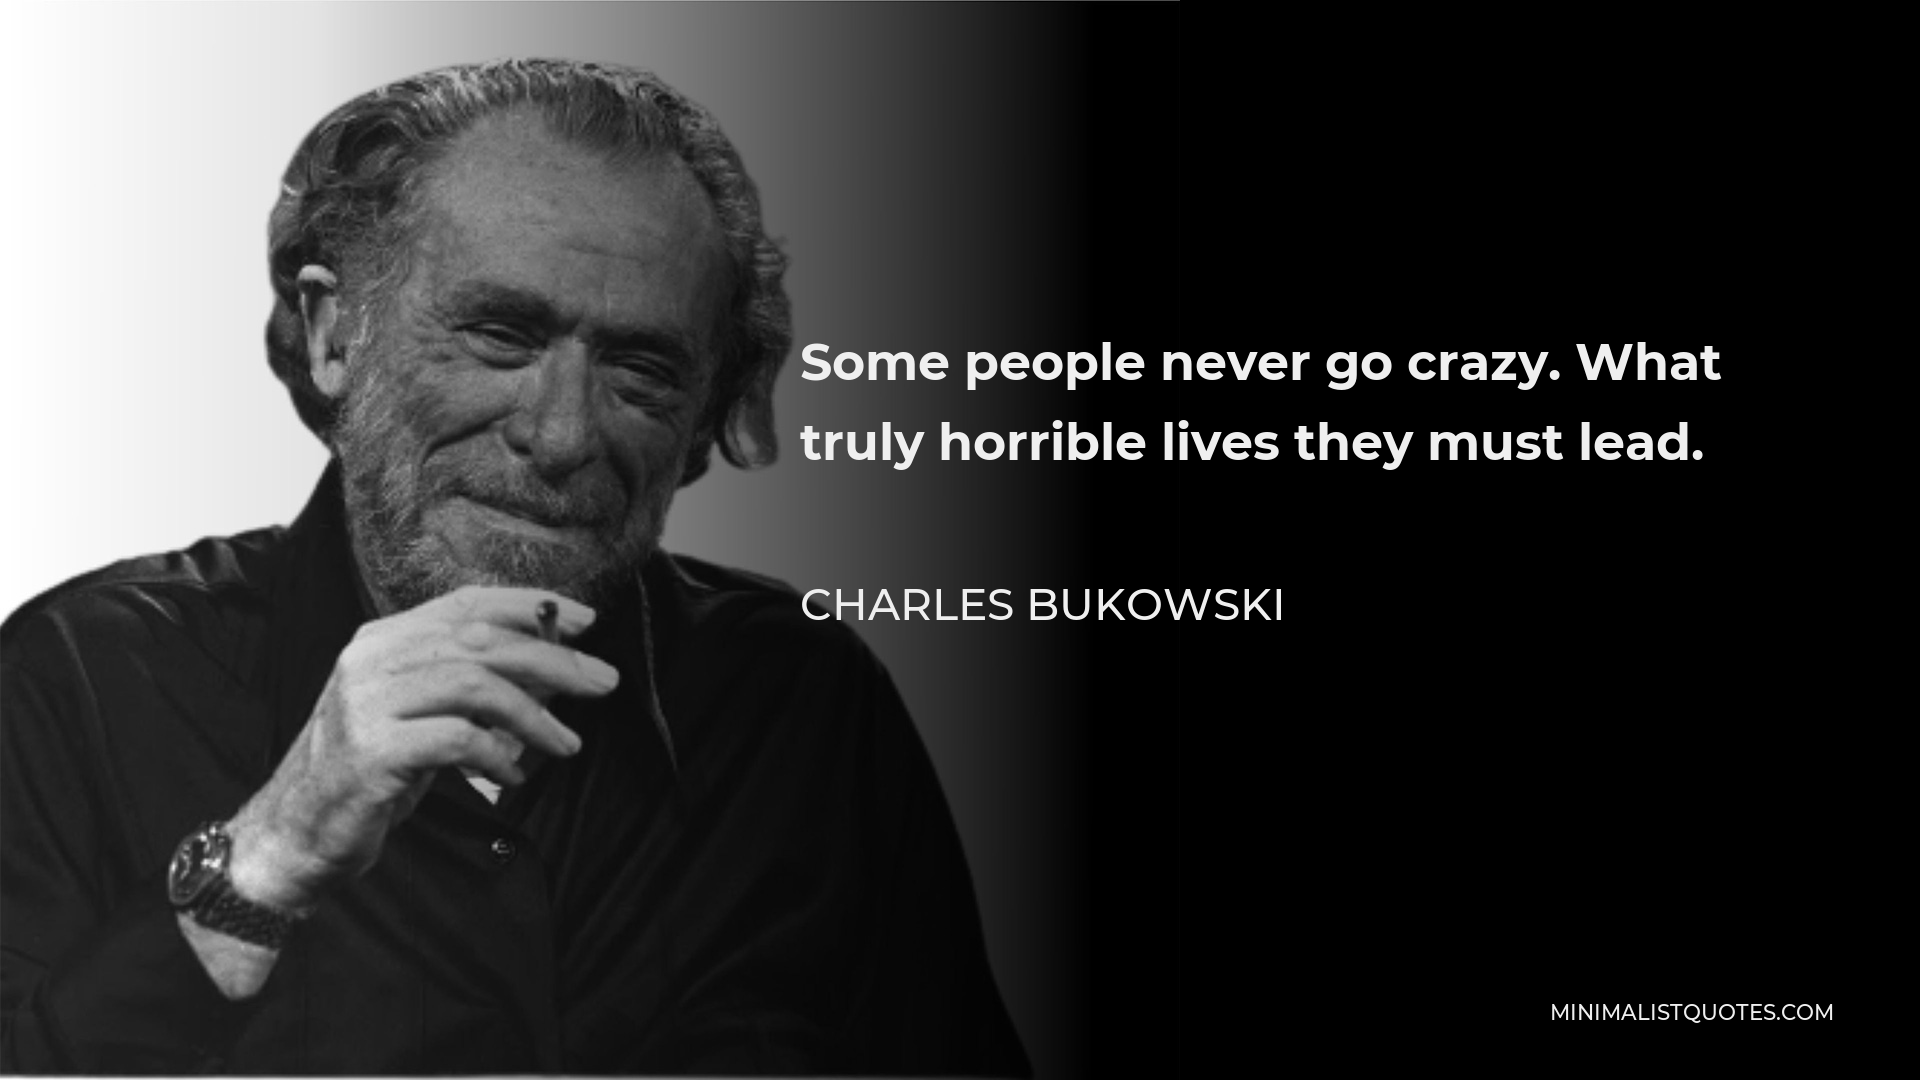 Charles Bukowski Quote - Some people never go crazy. What truly horrible lives they must lead.